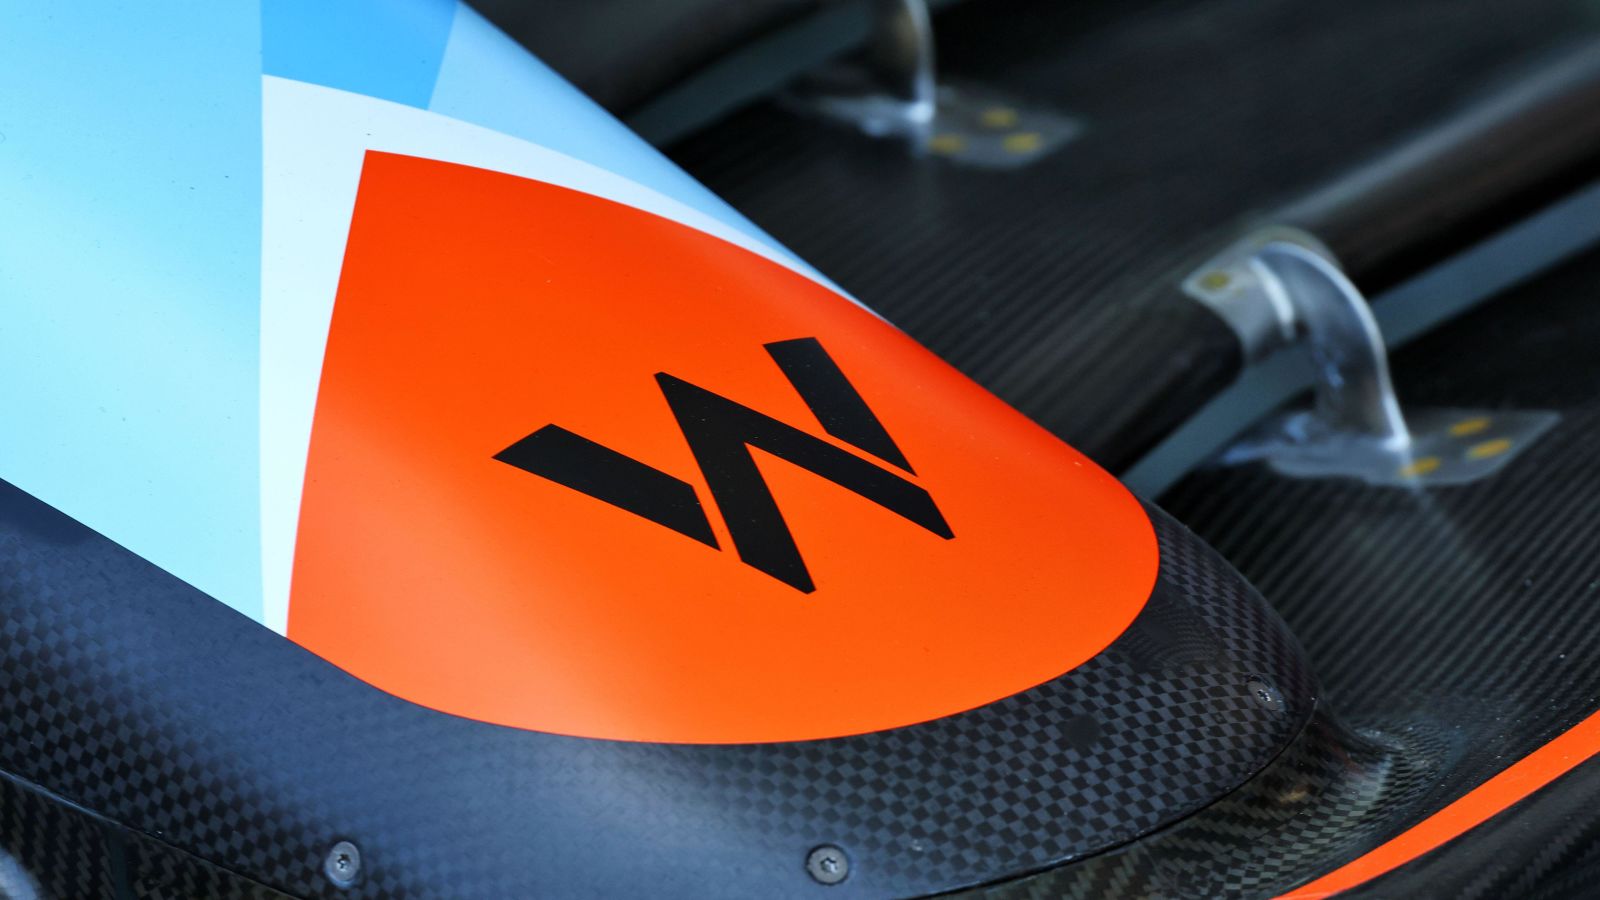 Gulf Oil International and Williams Racing Announce F1 Fan Voted Livery